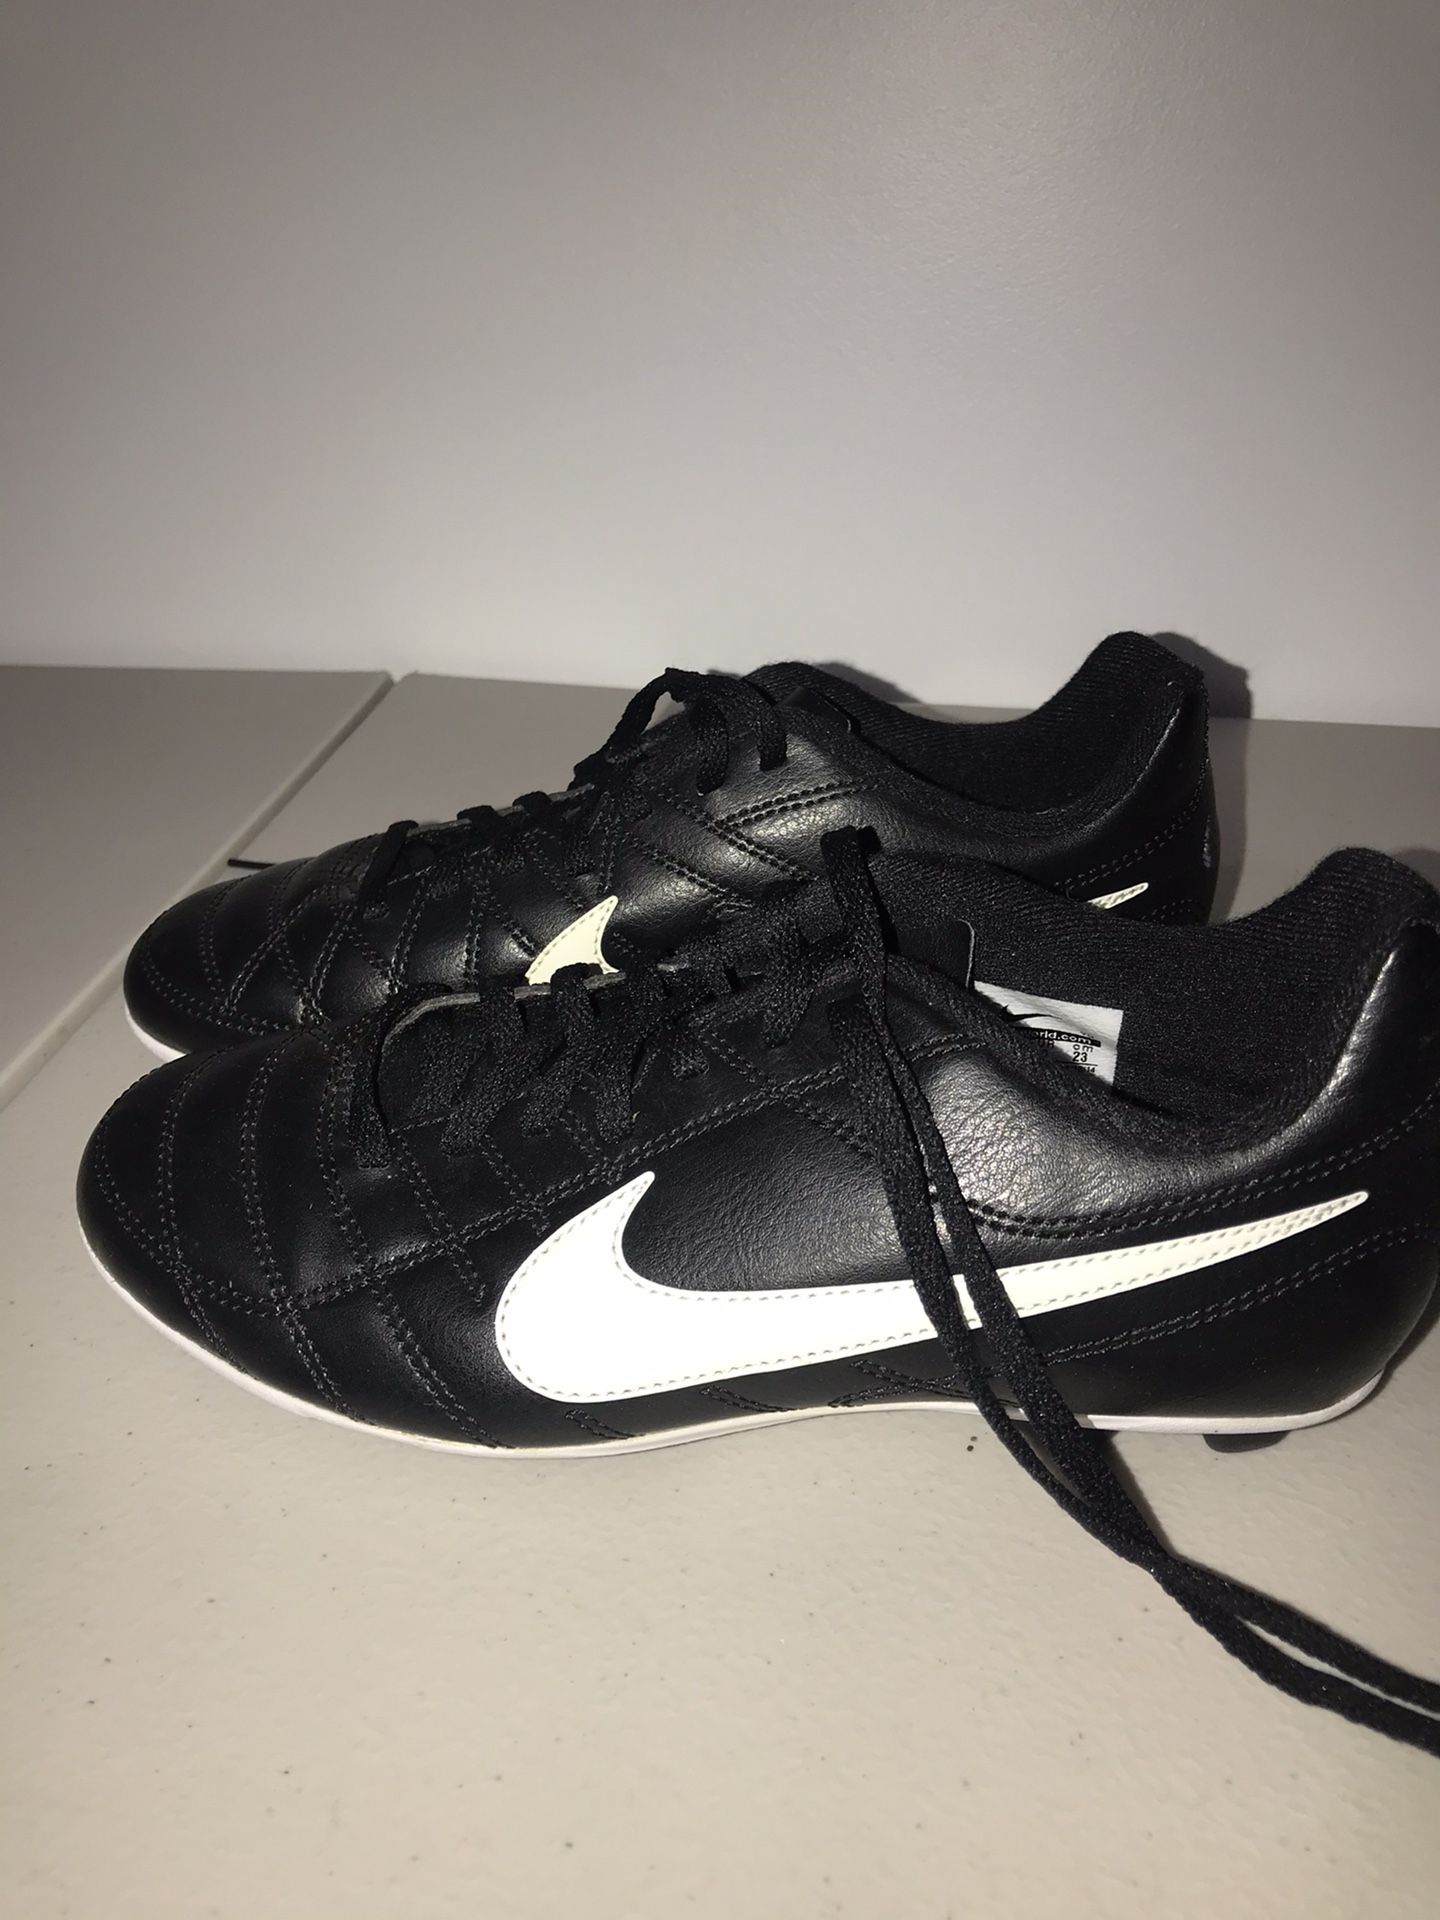 Kids Nike soccer shoes cleats size 4 Y